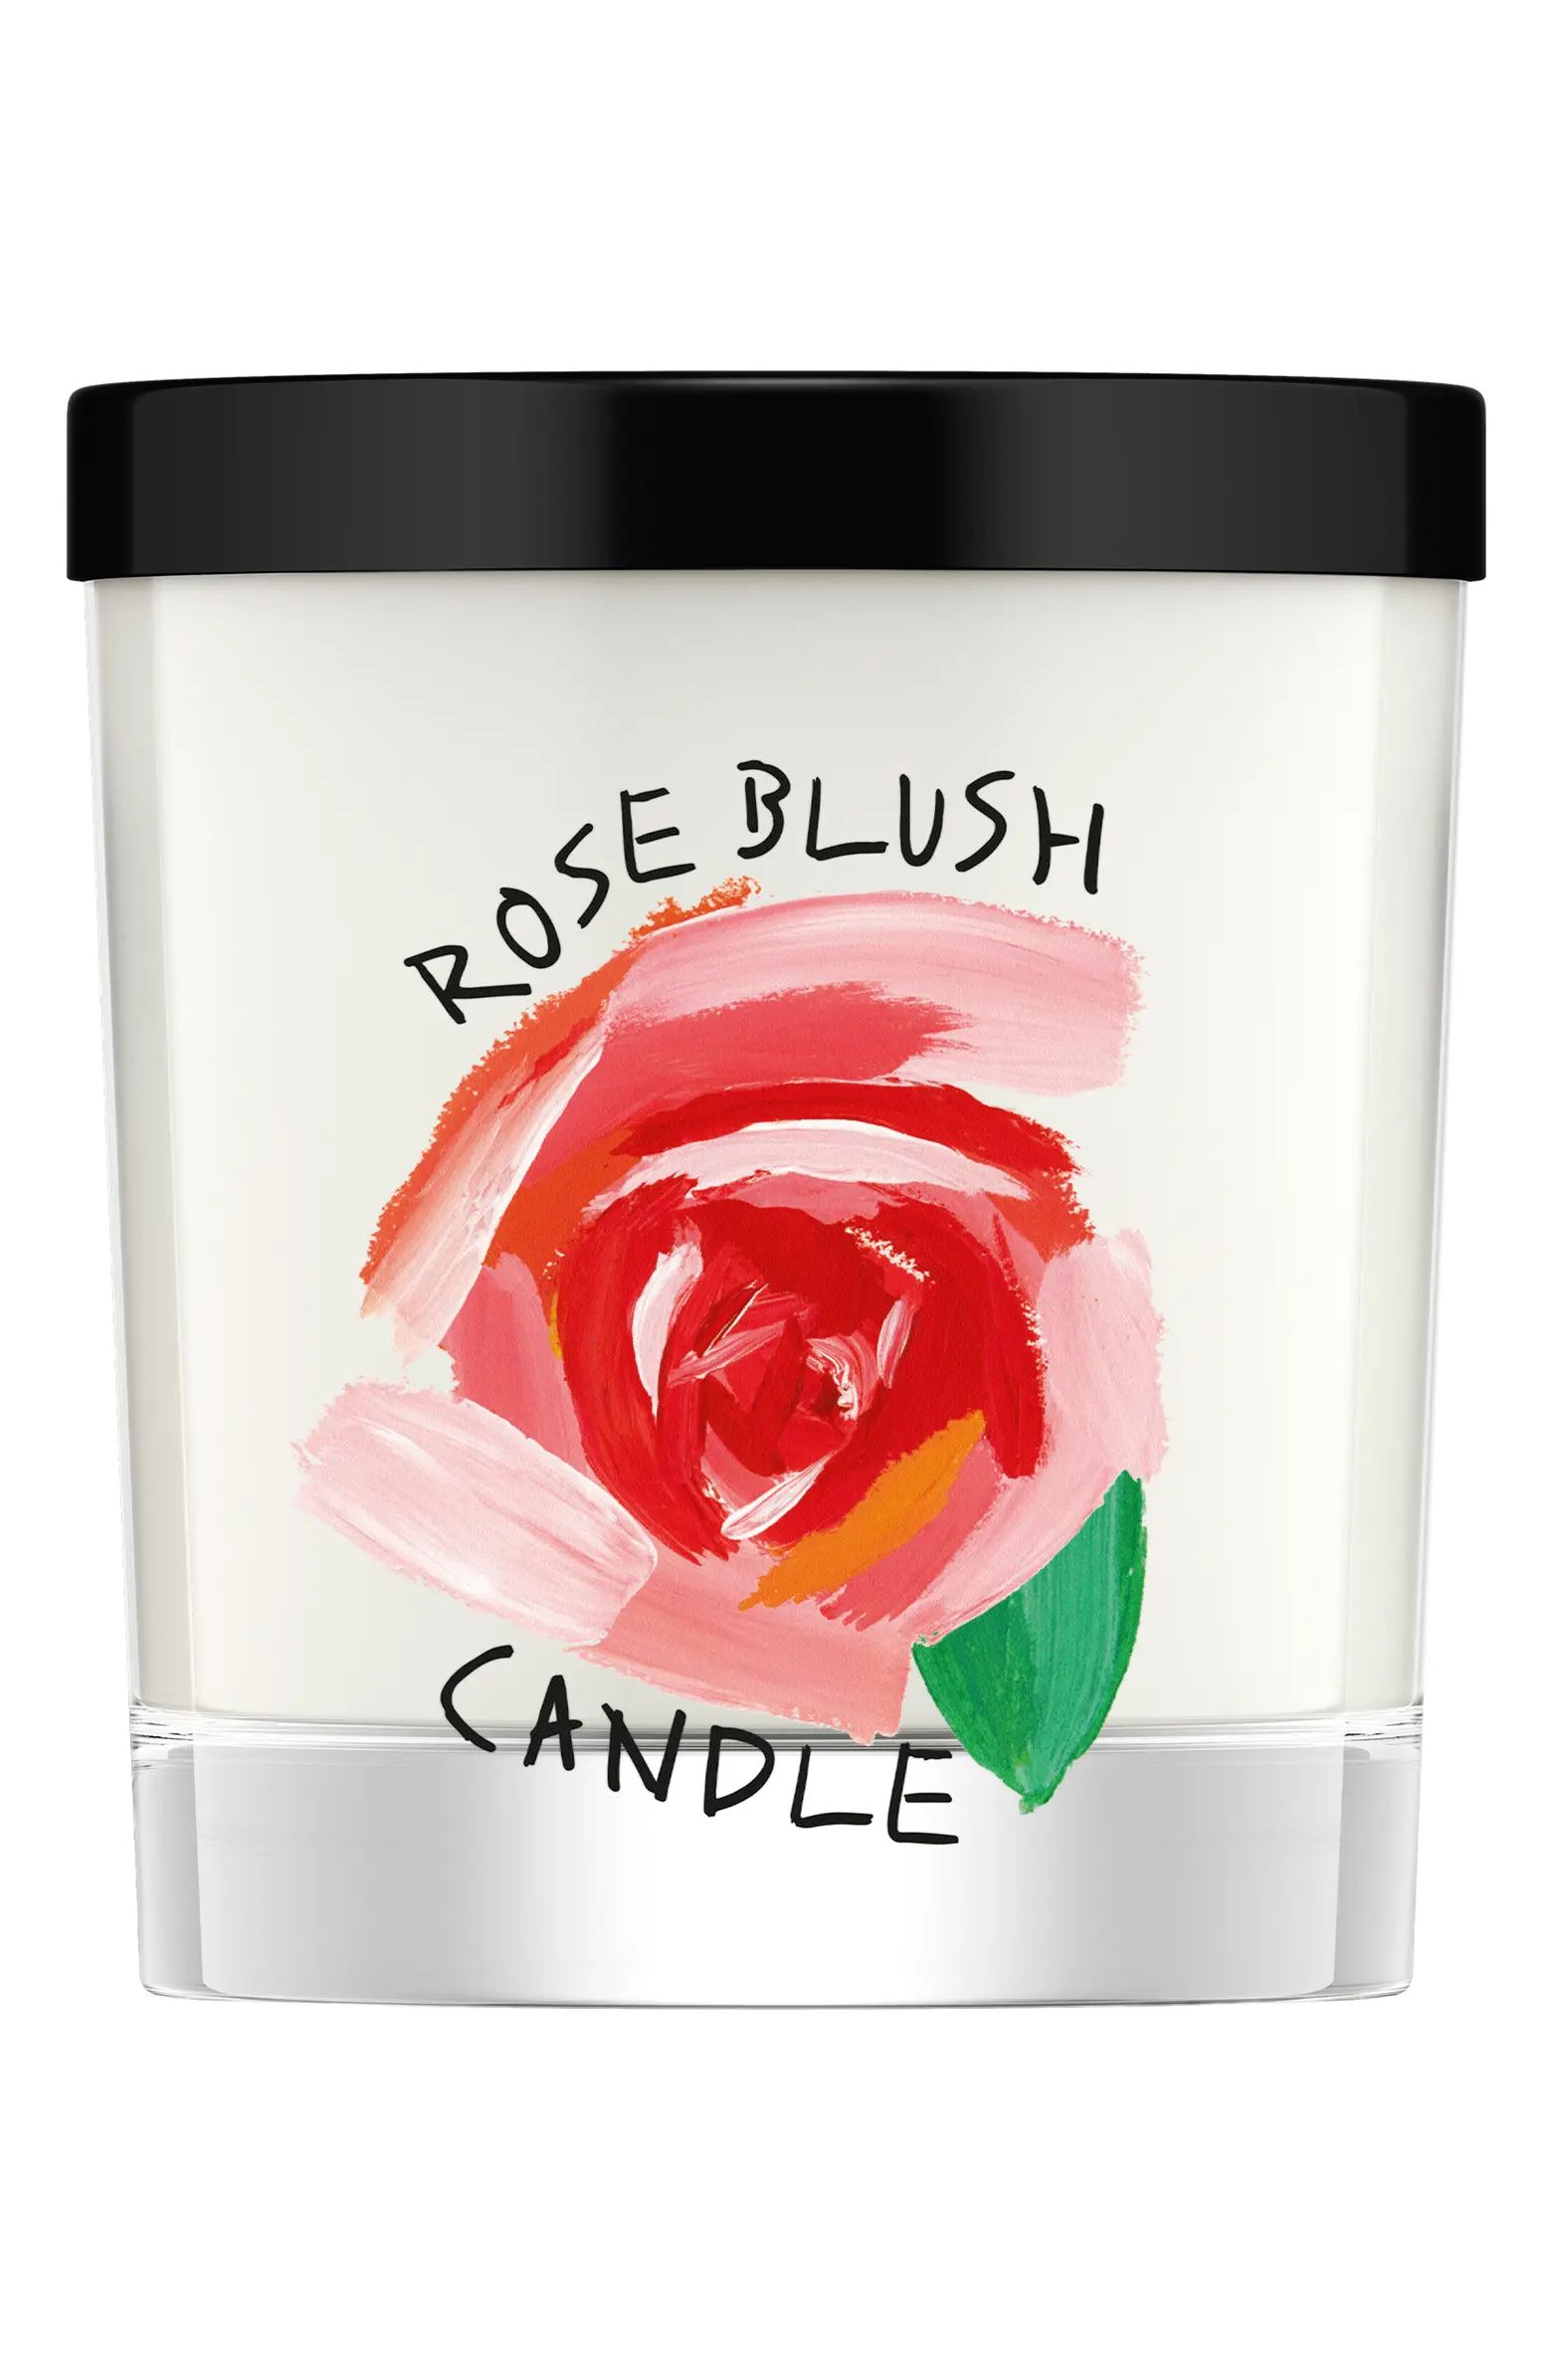 Rose Blush Home Candle | Nordstrom